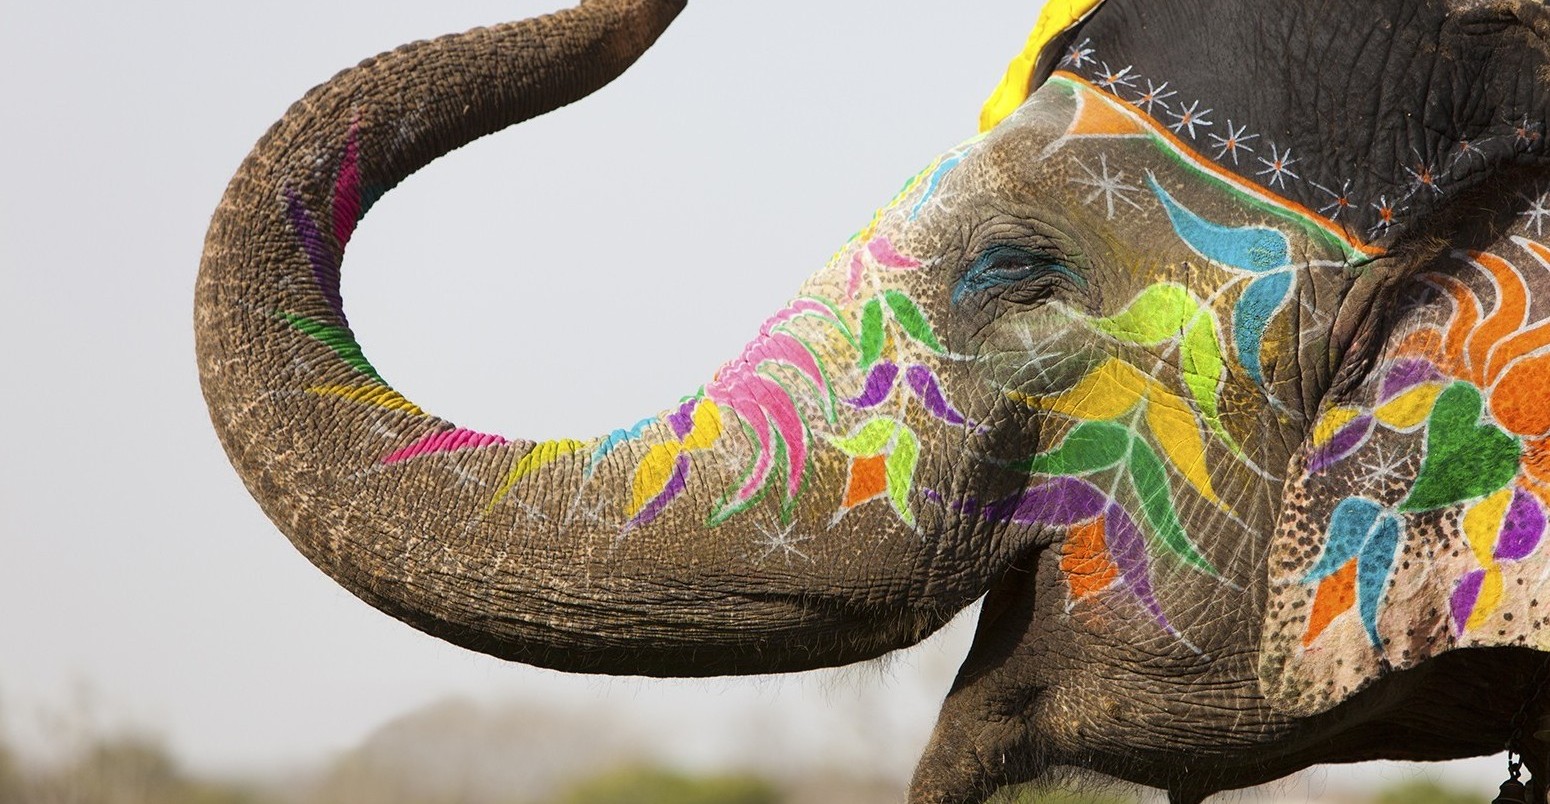 Decorated elephant at the annual elephant festival in Jaipur, India.